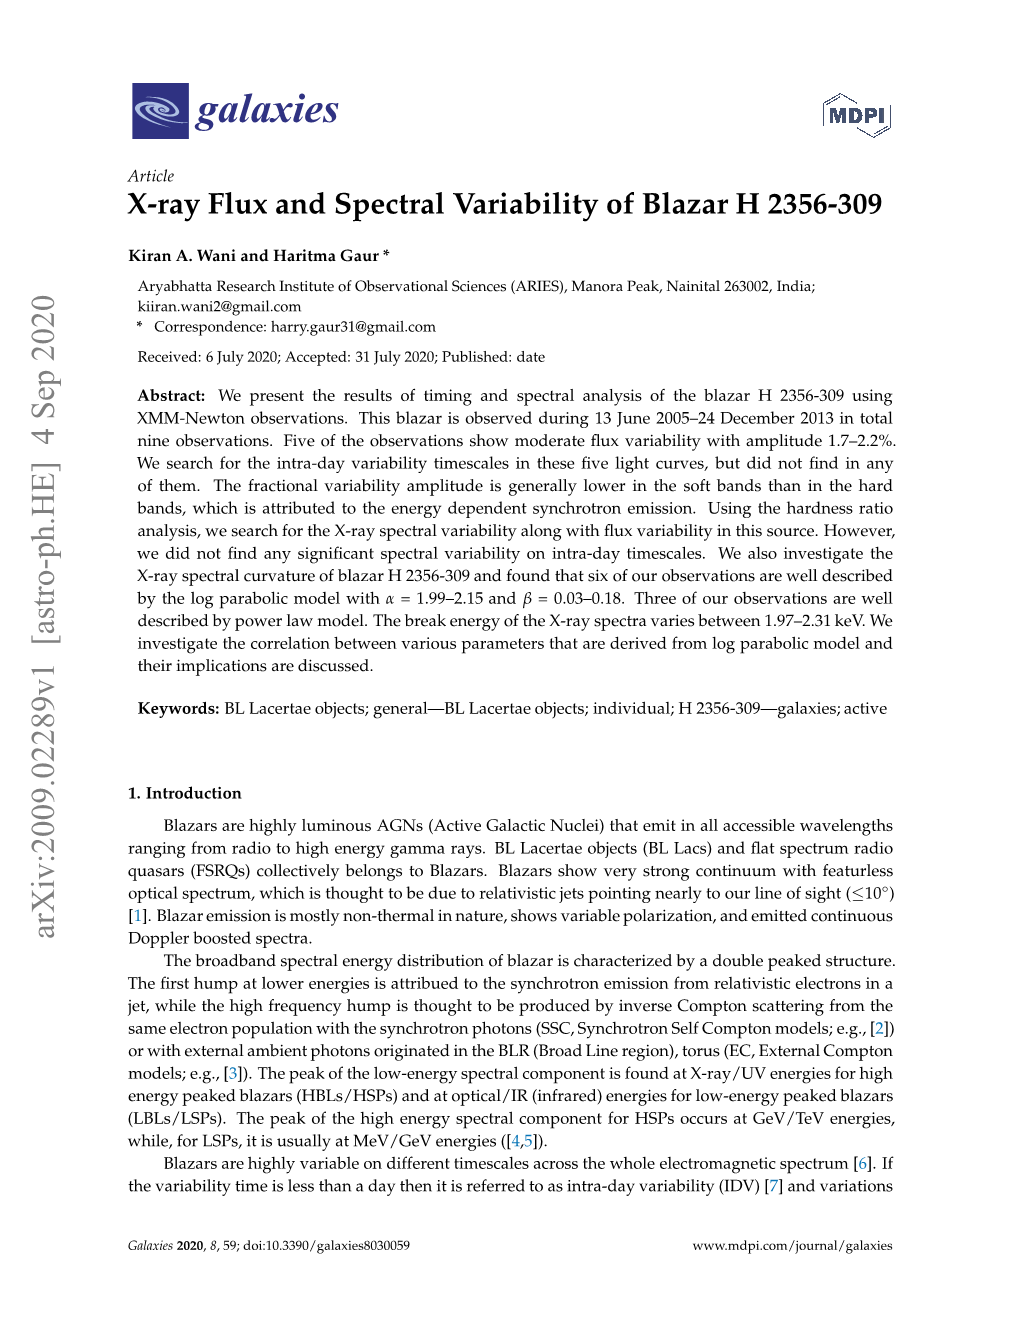 X-Ray Flux and Spectral Variability of Blazar H 2356-309